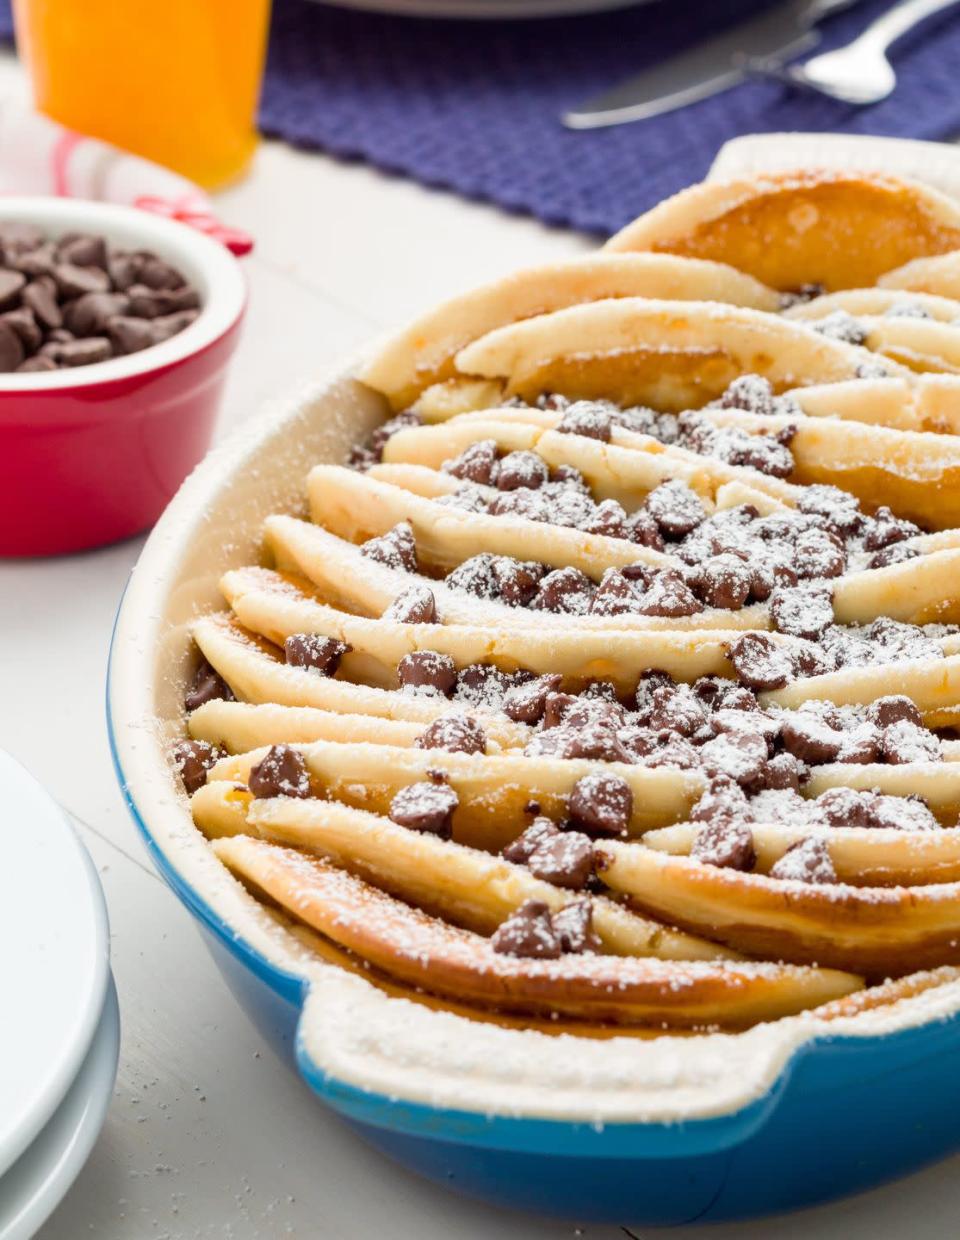 <p>If chocolate chips weren't enough, we showered this casserole with powdered sugar.</p><p>Get the recipe from <a href="http://www.delish.com/cooking/recipe-ideas/recipes/a45036/chocolate-chip-pancake-casserole-recipe/" rel="nofollow noopener" target="_blank" data-ylk="slk:Delish" class="link rapid-noclick-resp">Delish</a>.</p>